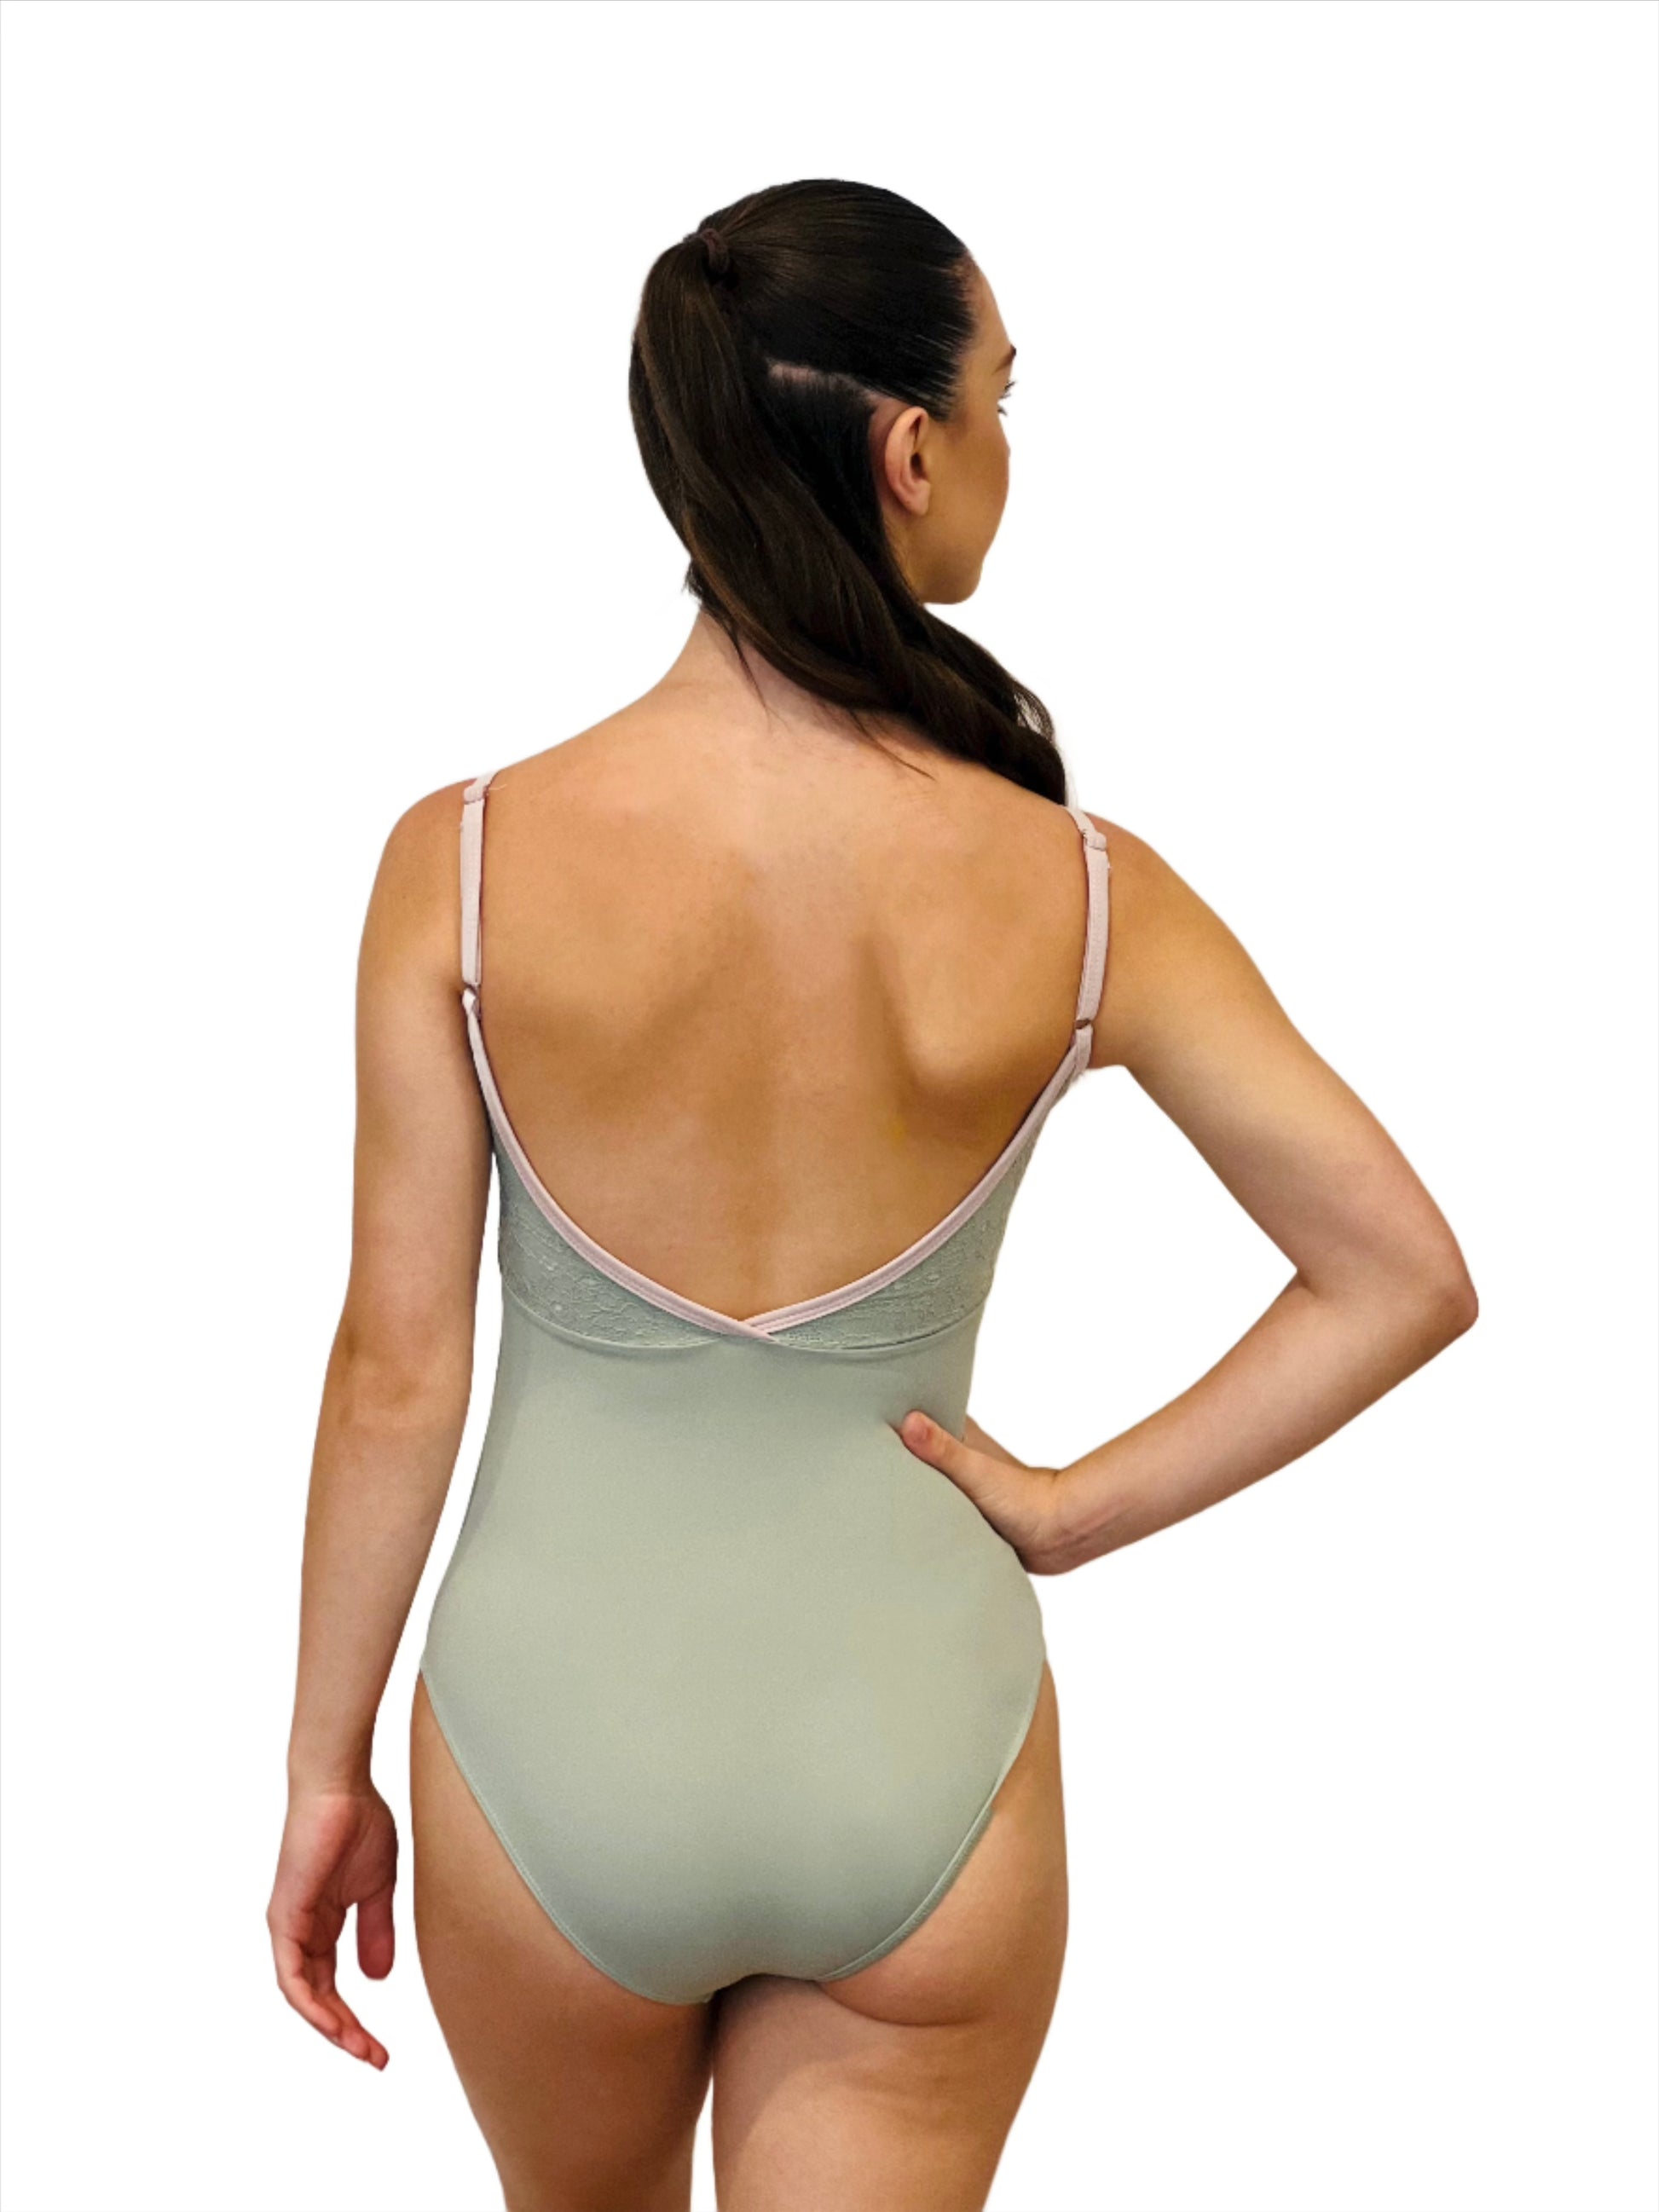 Lace top ballet leotard in sage green and contrasting lilac from The Collective Dancewear